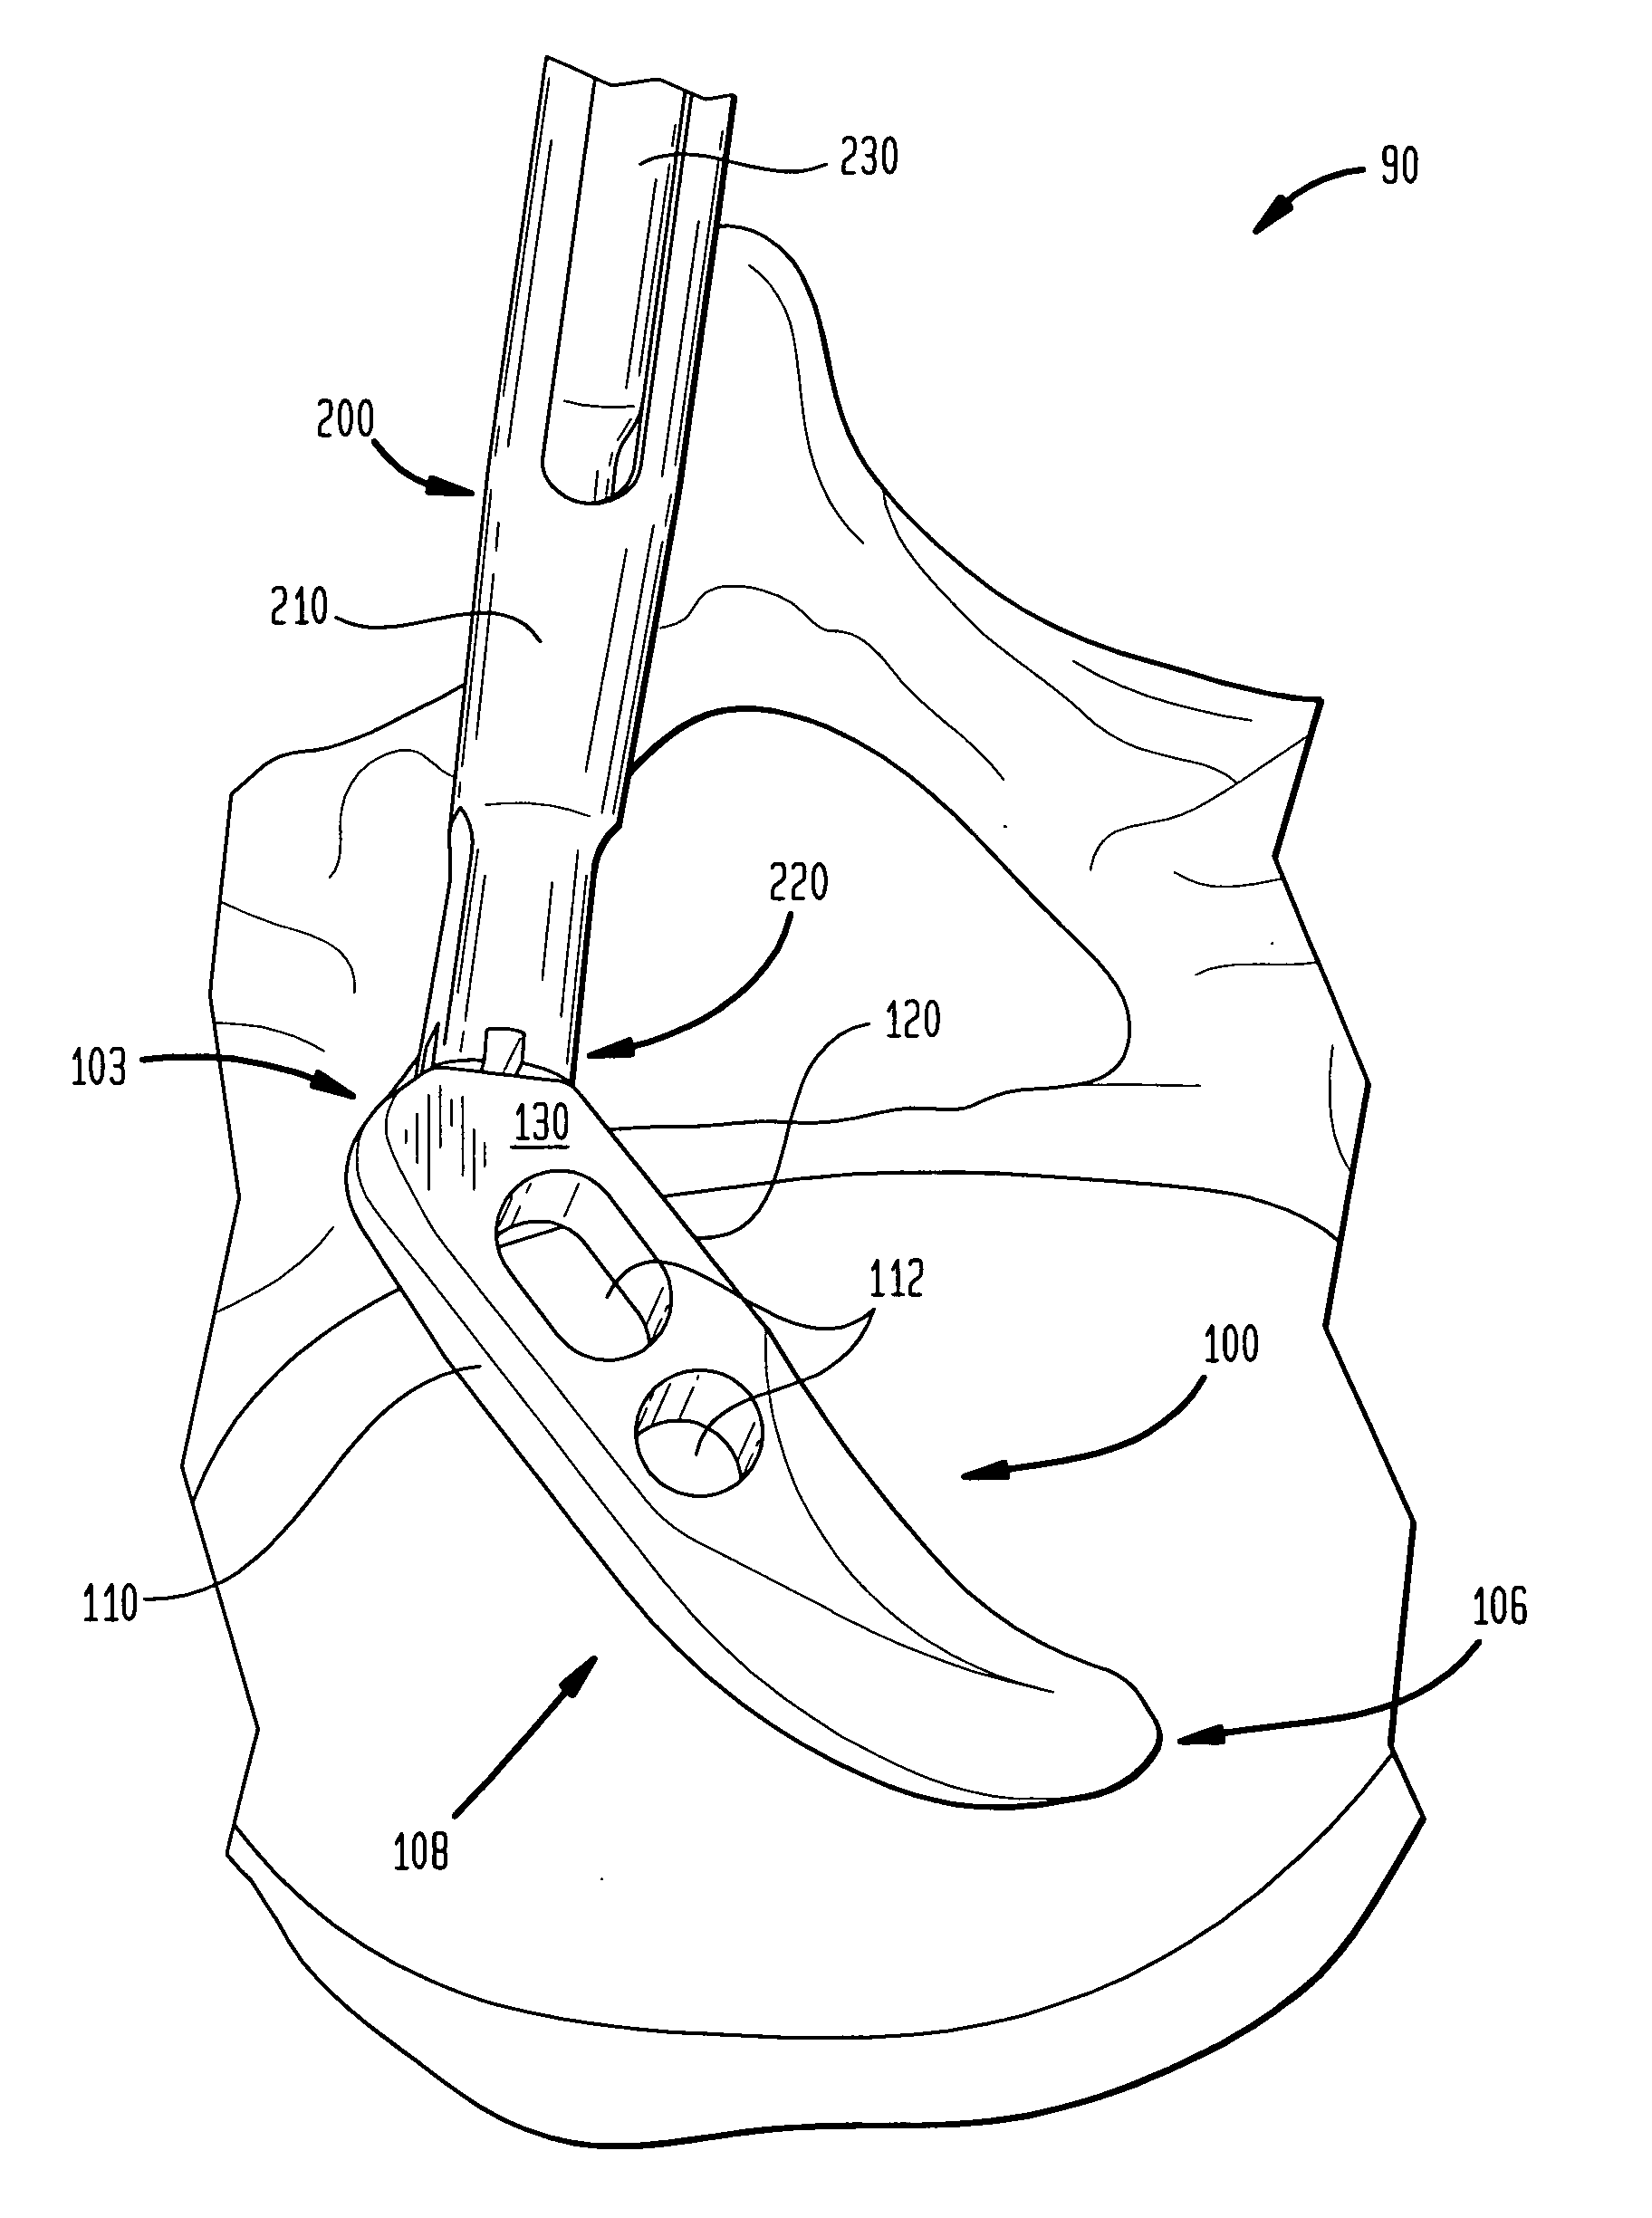 Spinal implant apparatus and methods